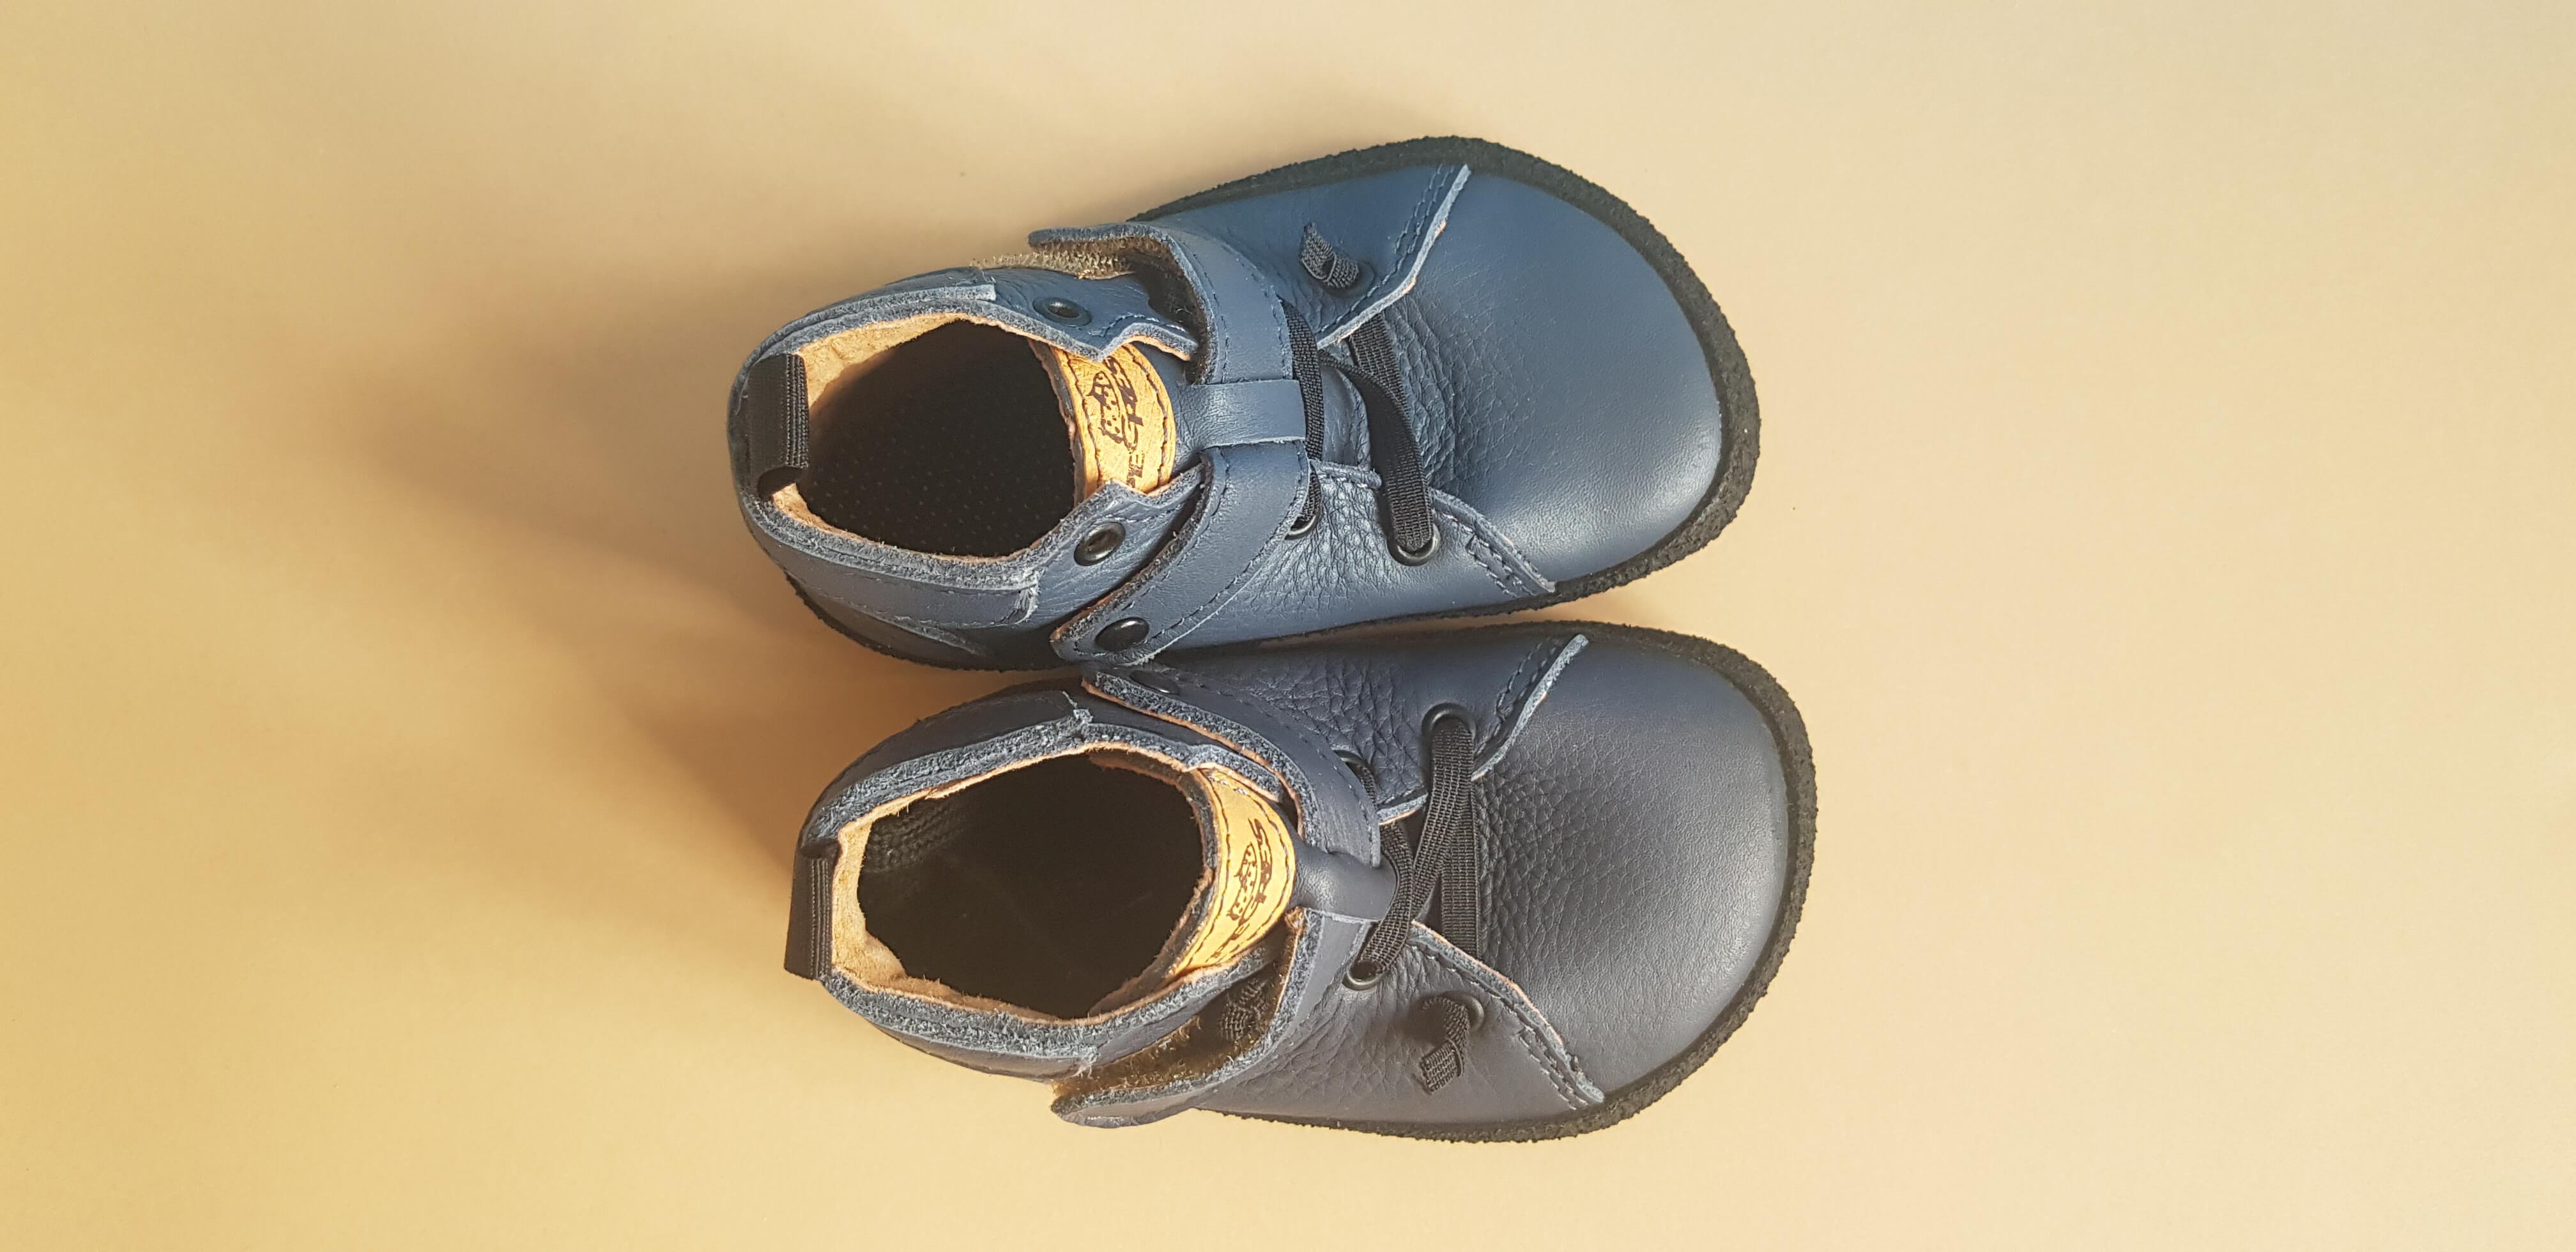 Barefoot Anatomically shaped Preschool shoes - Navy